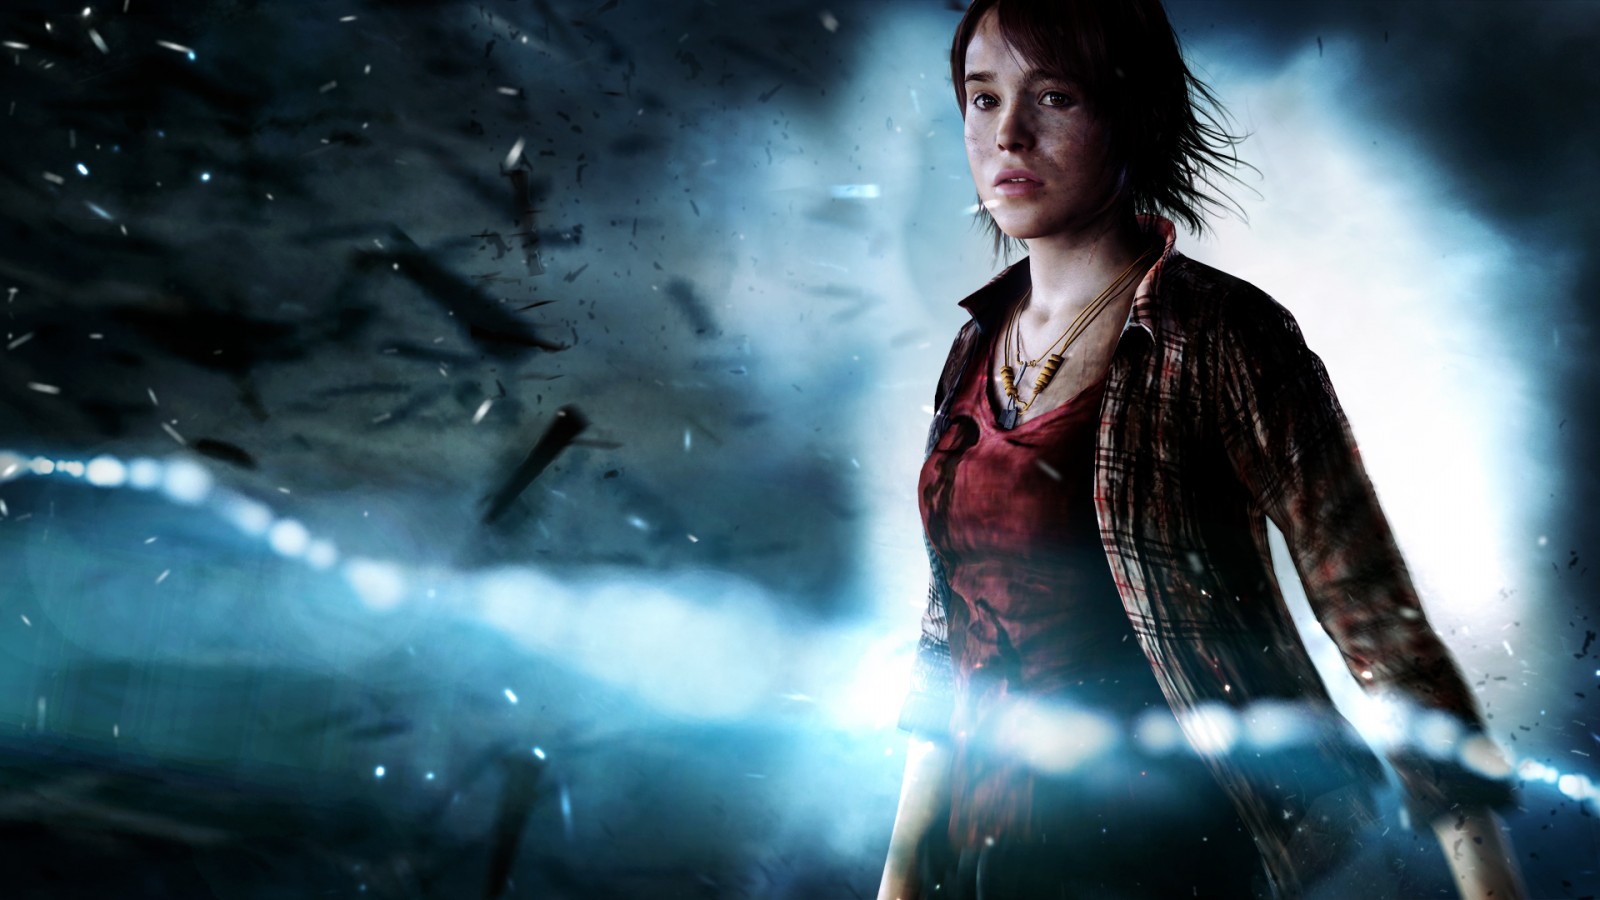 beyond two souls wallpaper,darkness,cg artwork,movie,fictional character,digital compositing